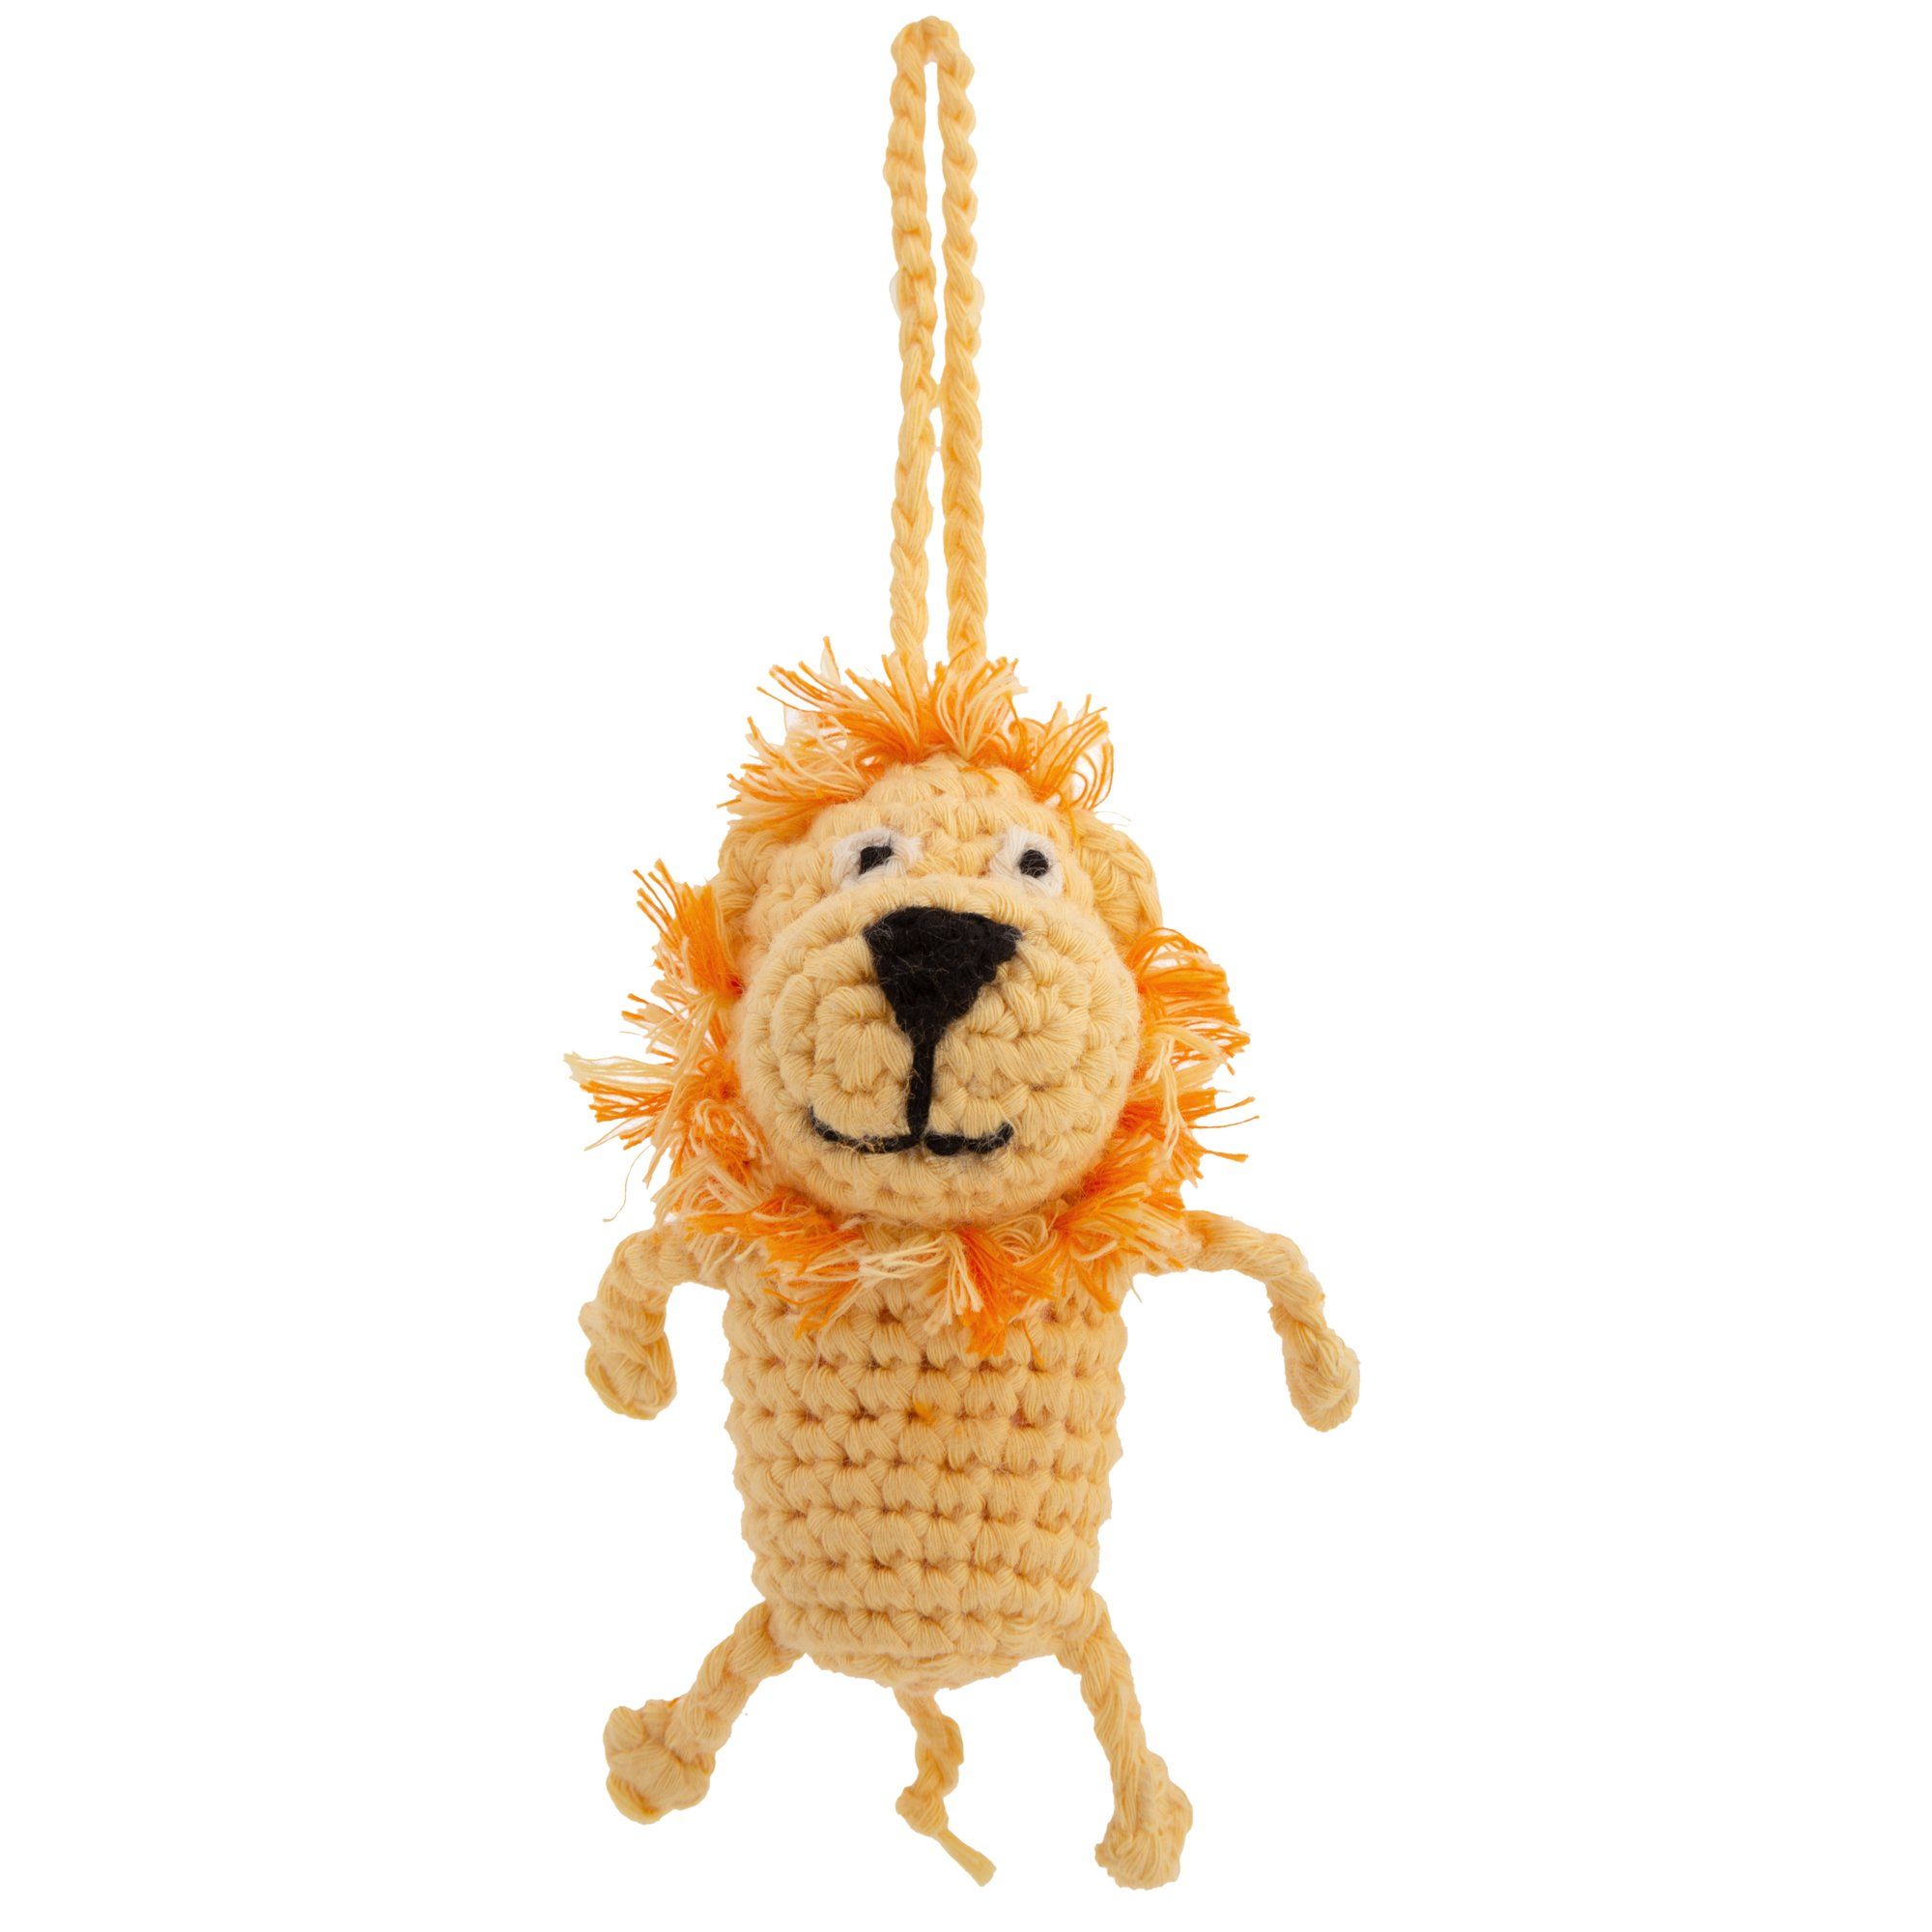 Hand crochet lion as cute as a button!  Yellow with orange and yellow main, big black nose & smile!